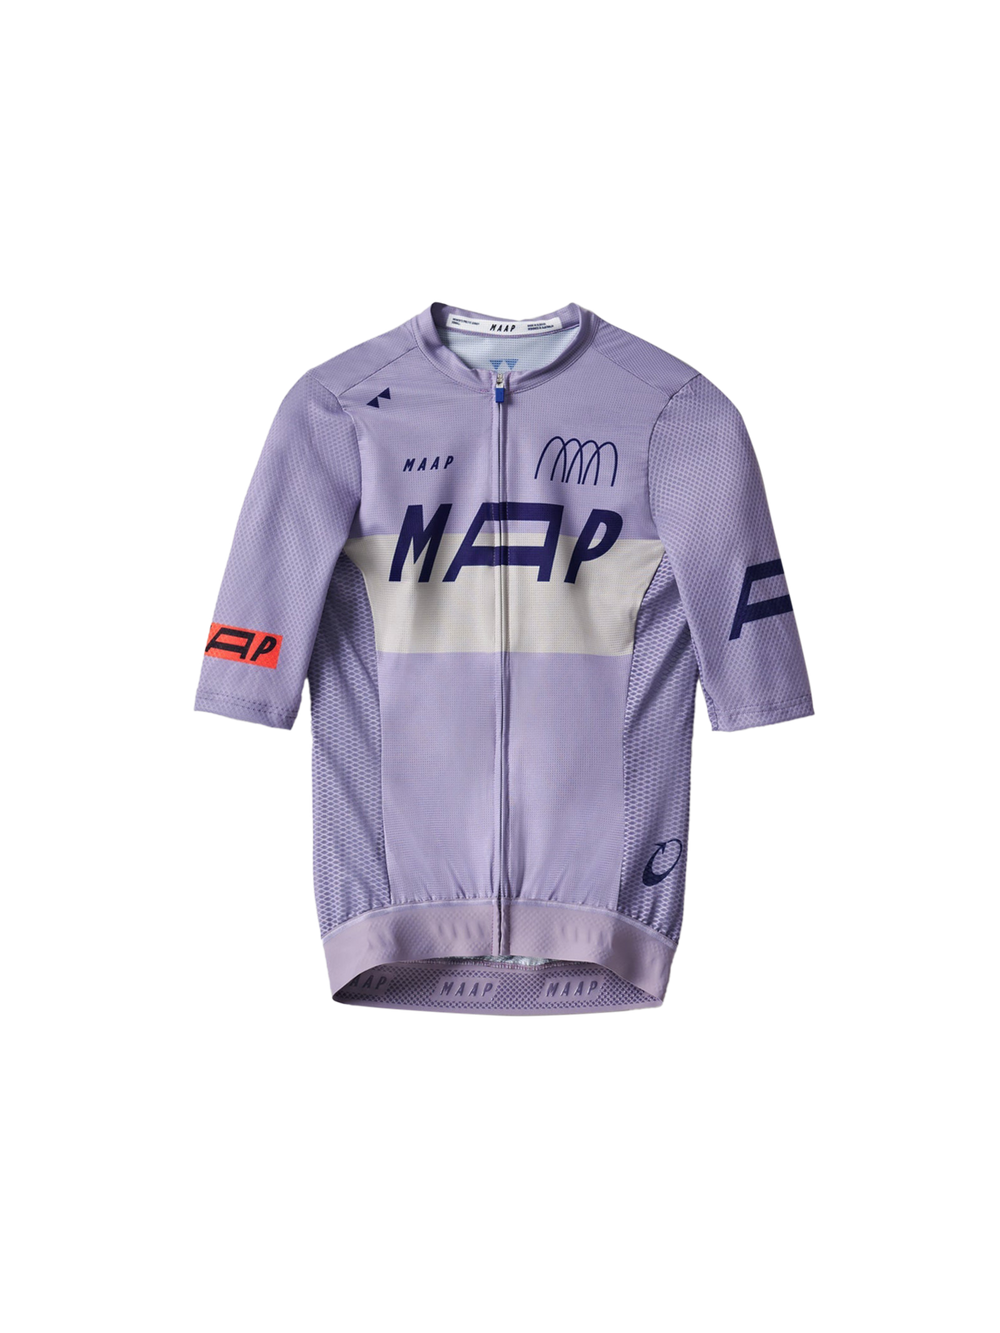 Product Image for Women's Adapt Pro Air Jersey